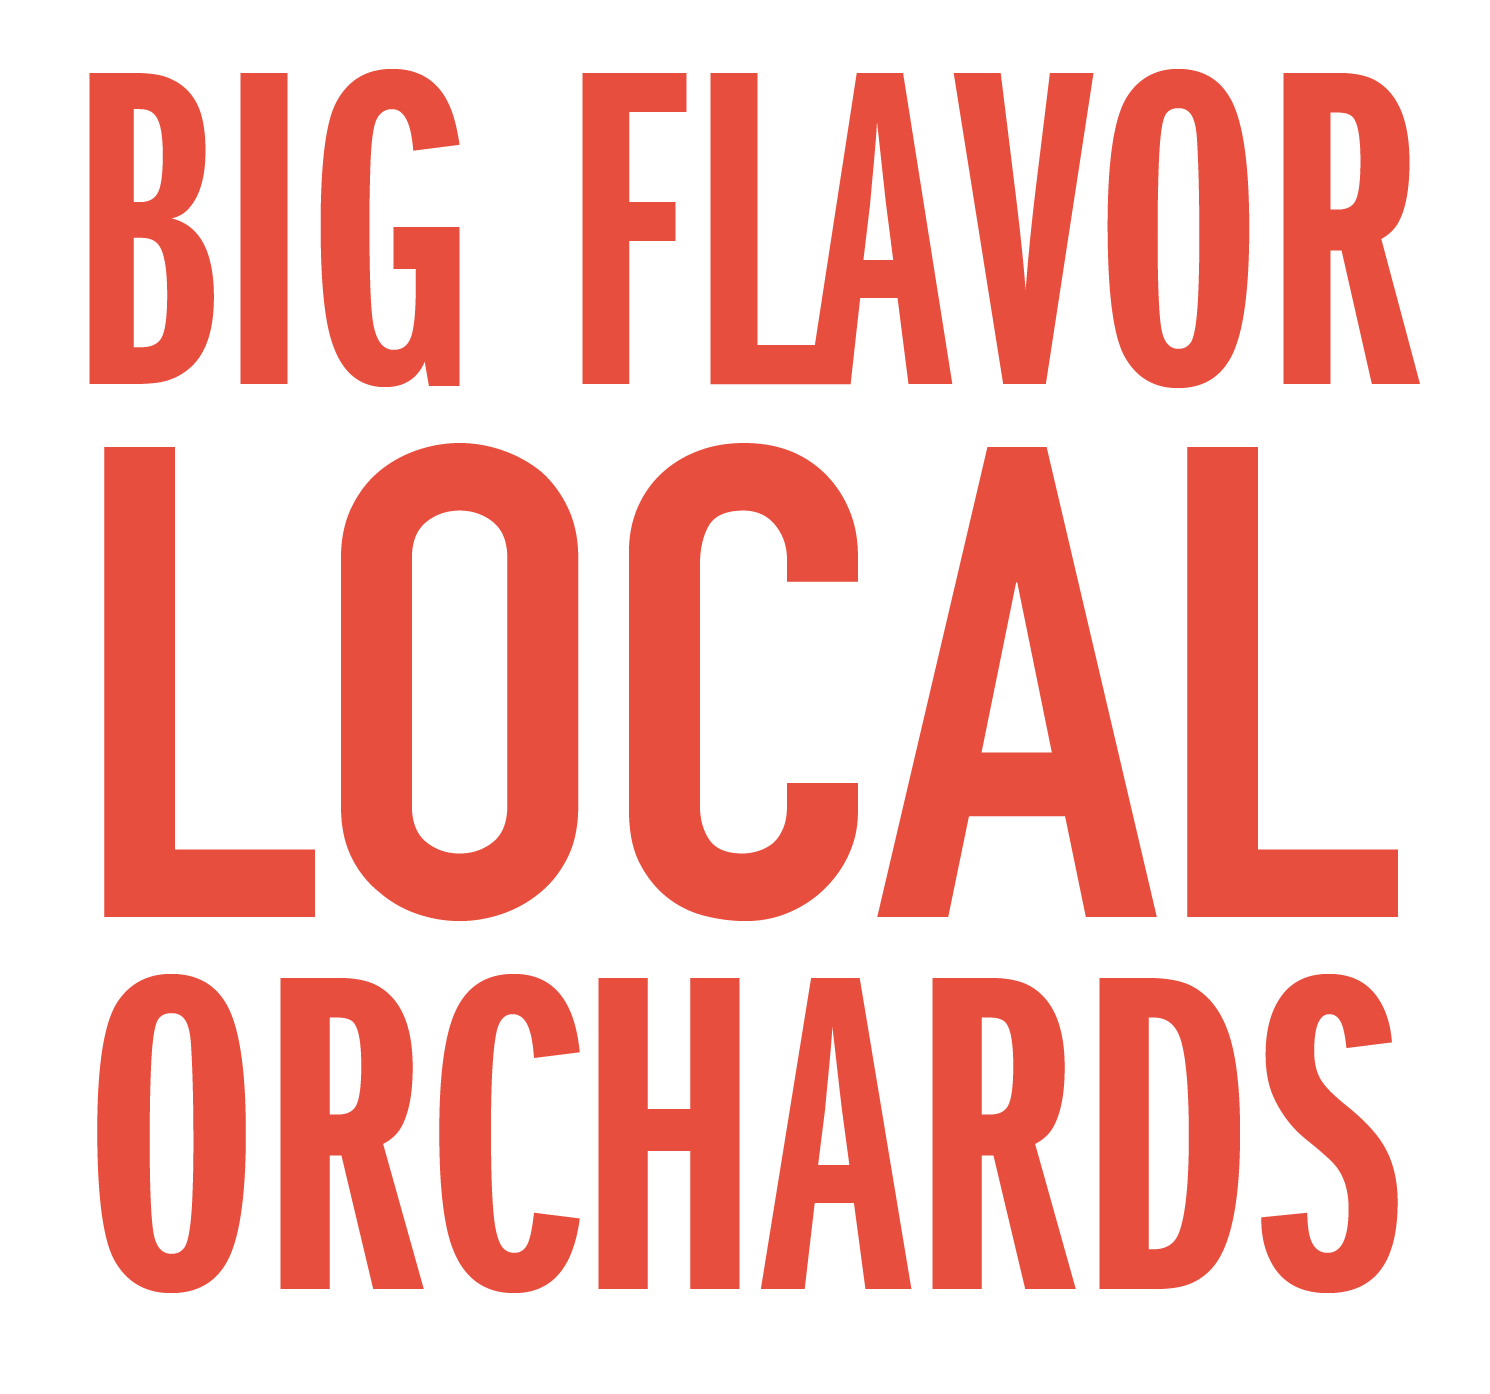 Big Flavor Local Orchards